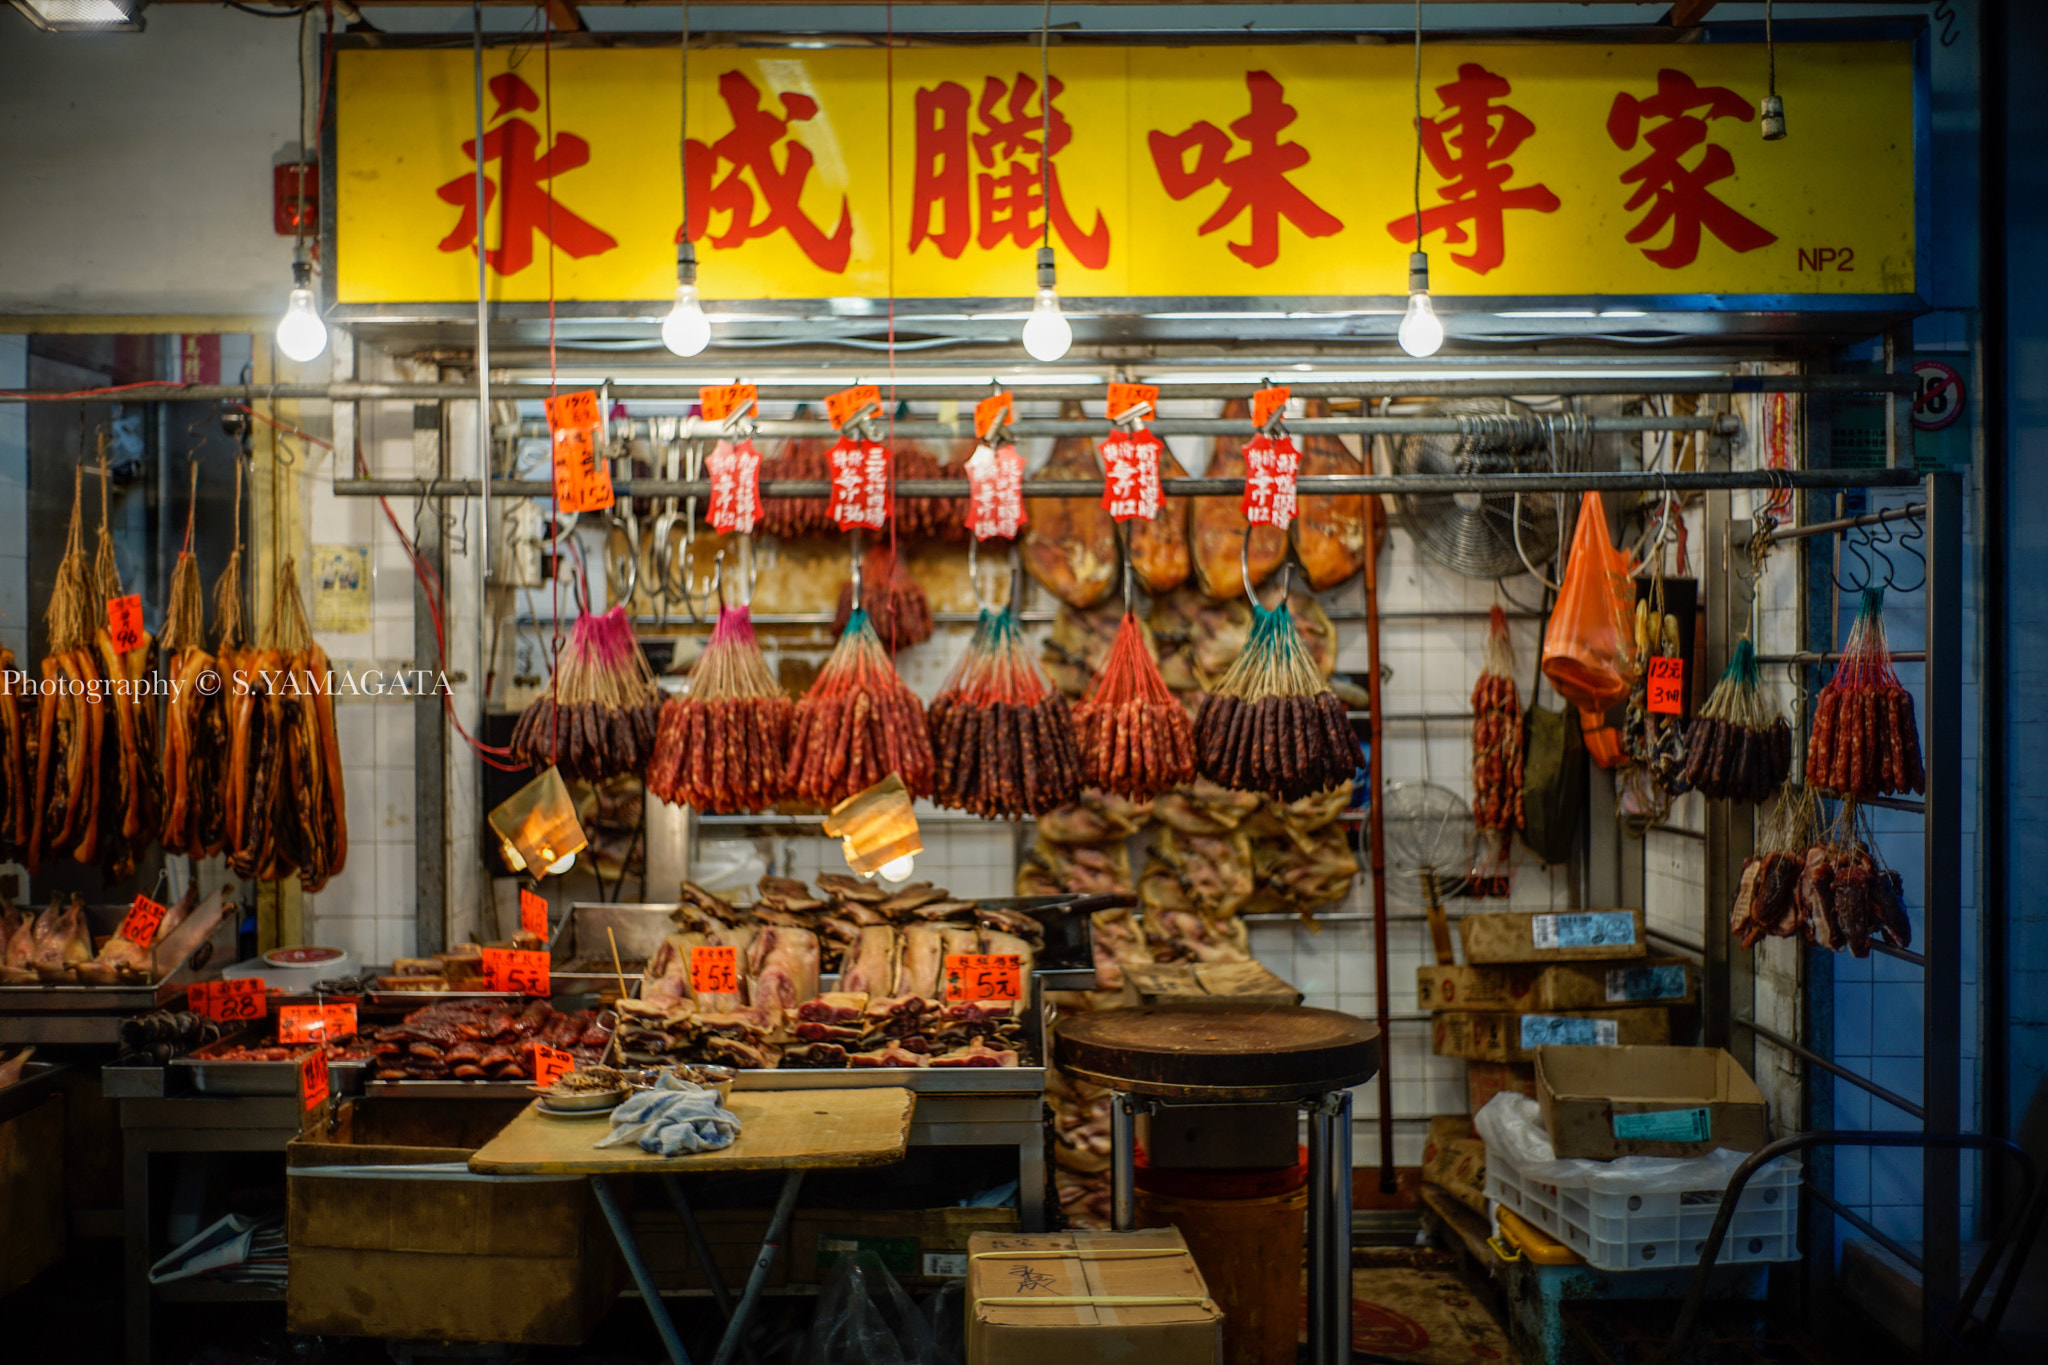 Sony a7 II + DT 40mm F2.8 SAM sample photo. Chinese sausage photography